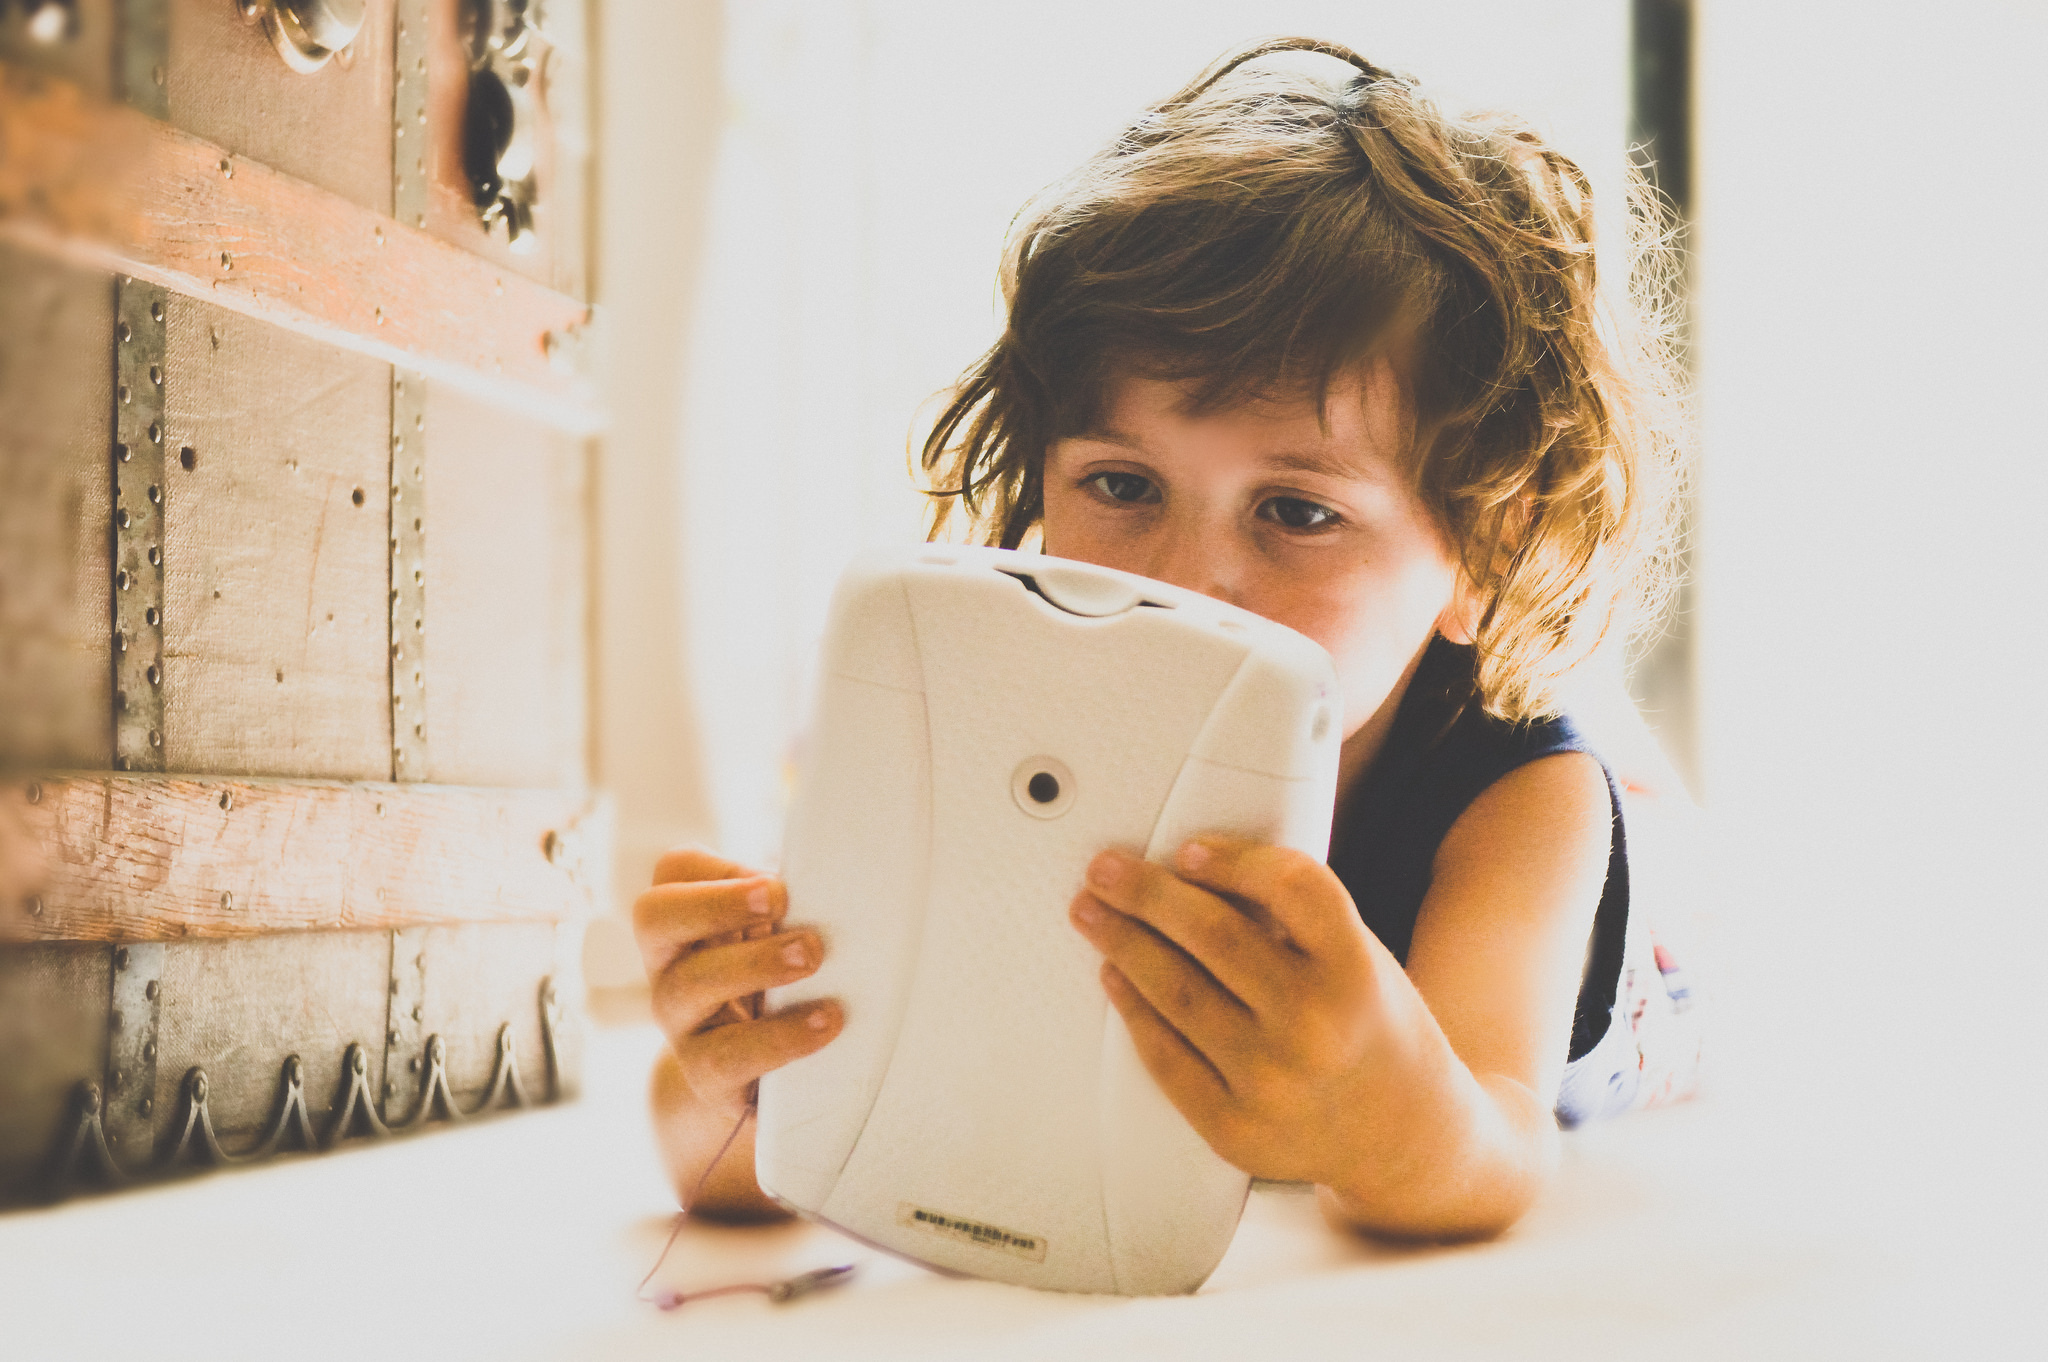 “I call Gamma”: Is Video Chat Good For Tots?